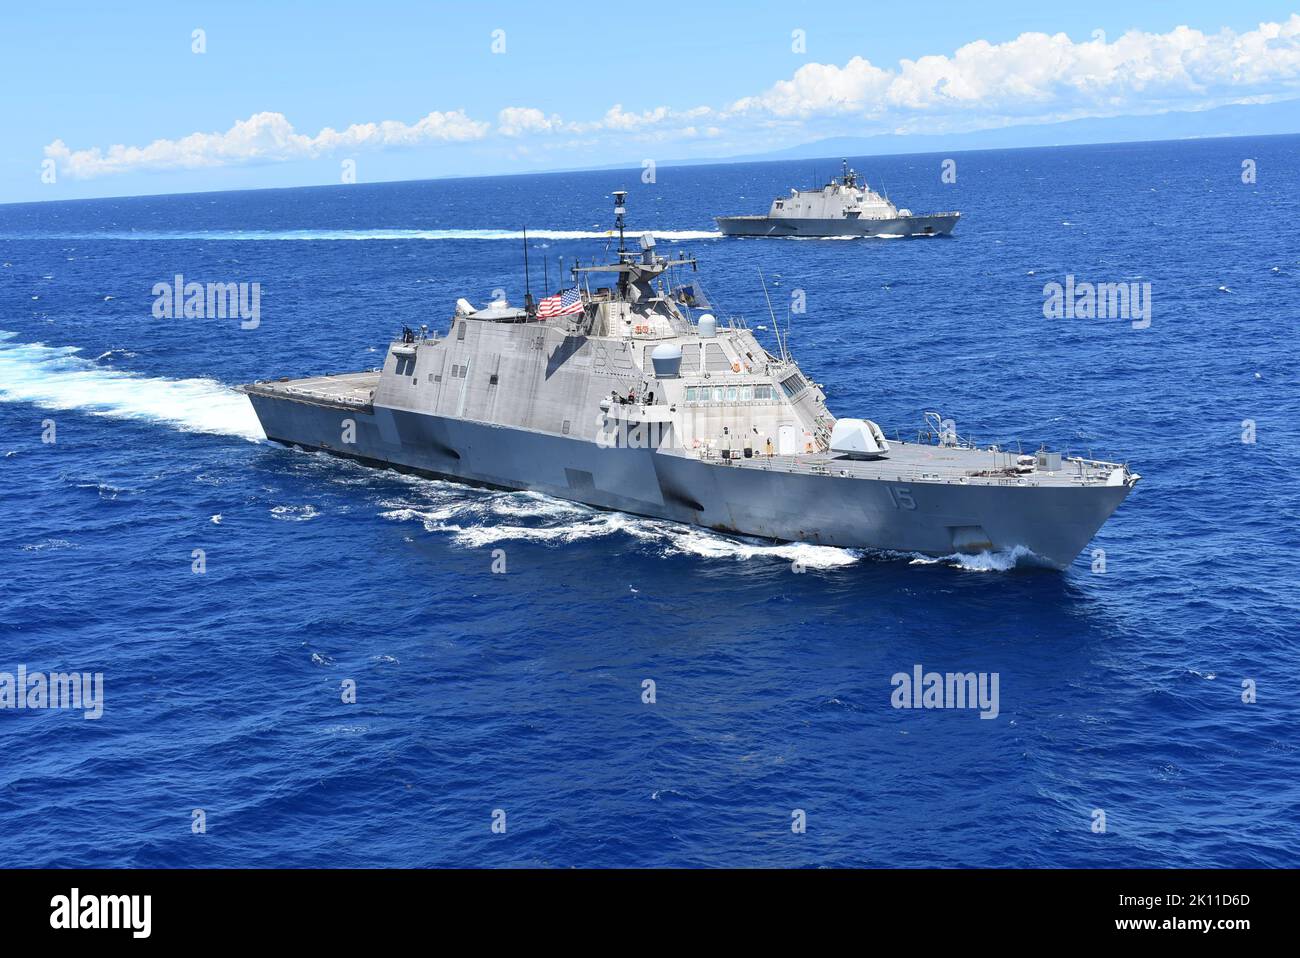 220910-N-N3764-2001  Caribbean Sea - (Sept. 10, 2022) — The Freedom-variant littoral combat ships USS Billings (LCS 15) and USS Wichita (LCS 13) participate in a photo exercise in the Caribbean Sea, Sept. 10, 2022. Wichita and Billings are deployed to the U.S. 4th Fleet area of operations to support Joint Interagency Task Force South’s mission, which includes counter-illicit drug trafficking missions in the Caribbean and Eastern Pacific. (U.S. Navy photo by Mineman 2nd Class Justin Hovarter/Released) Stock Photo